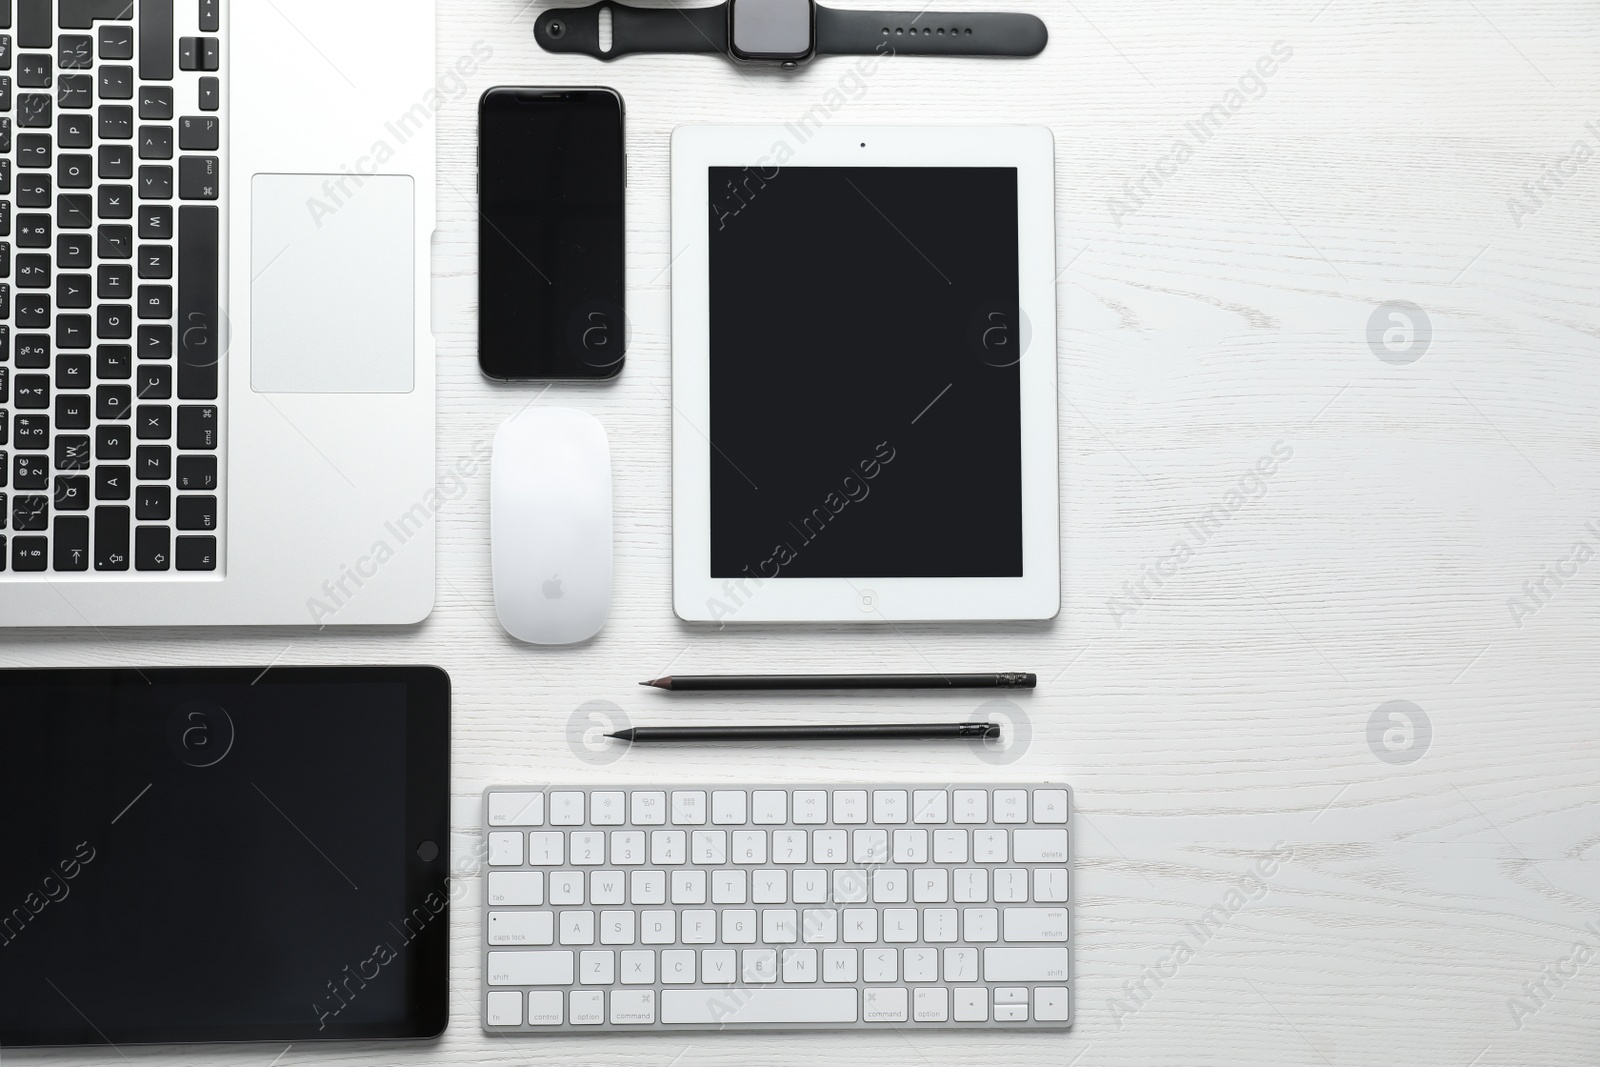 Photo of MYKOLAIV, UKRAINE - AUGUST 28, 2020: Flat lay composition with iPhone 11, MacBook laptop and iPad tablets on white table